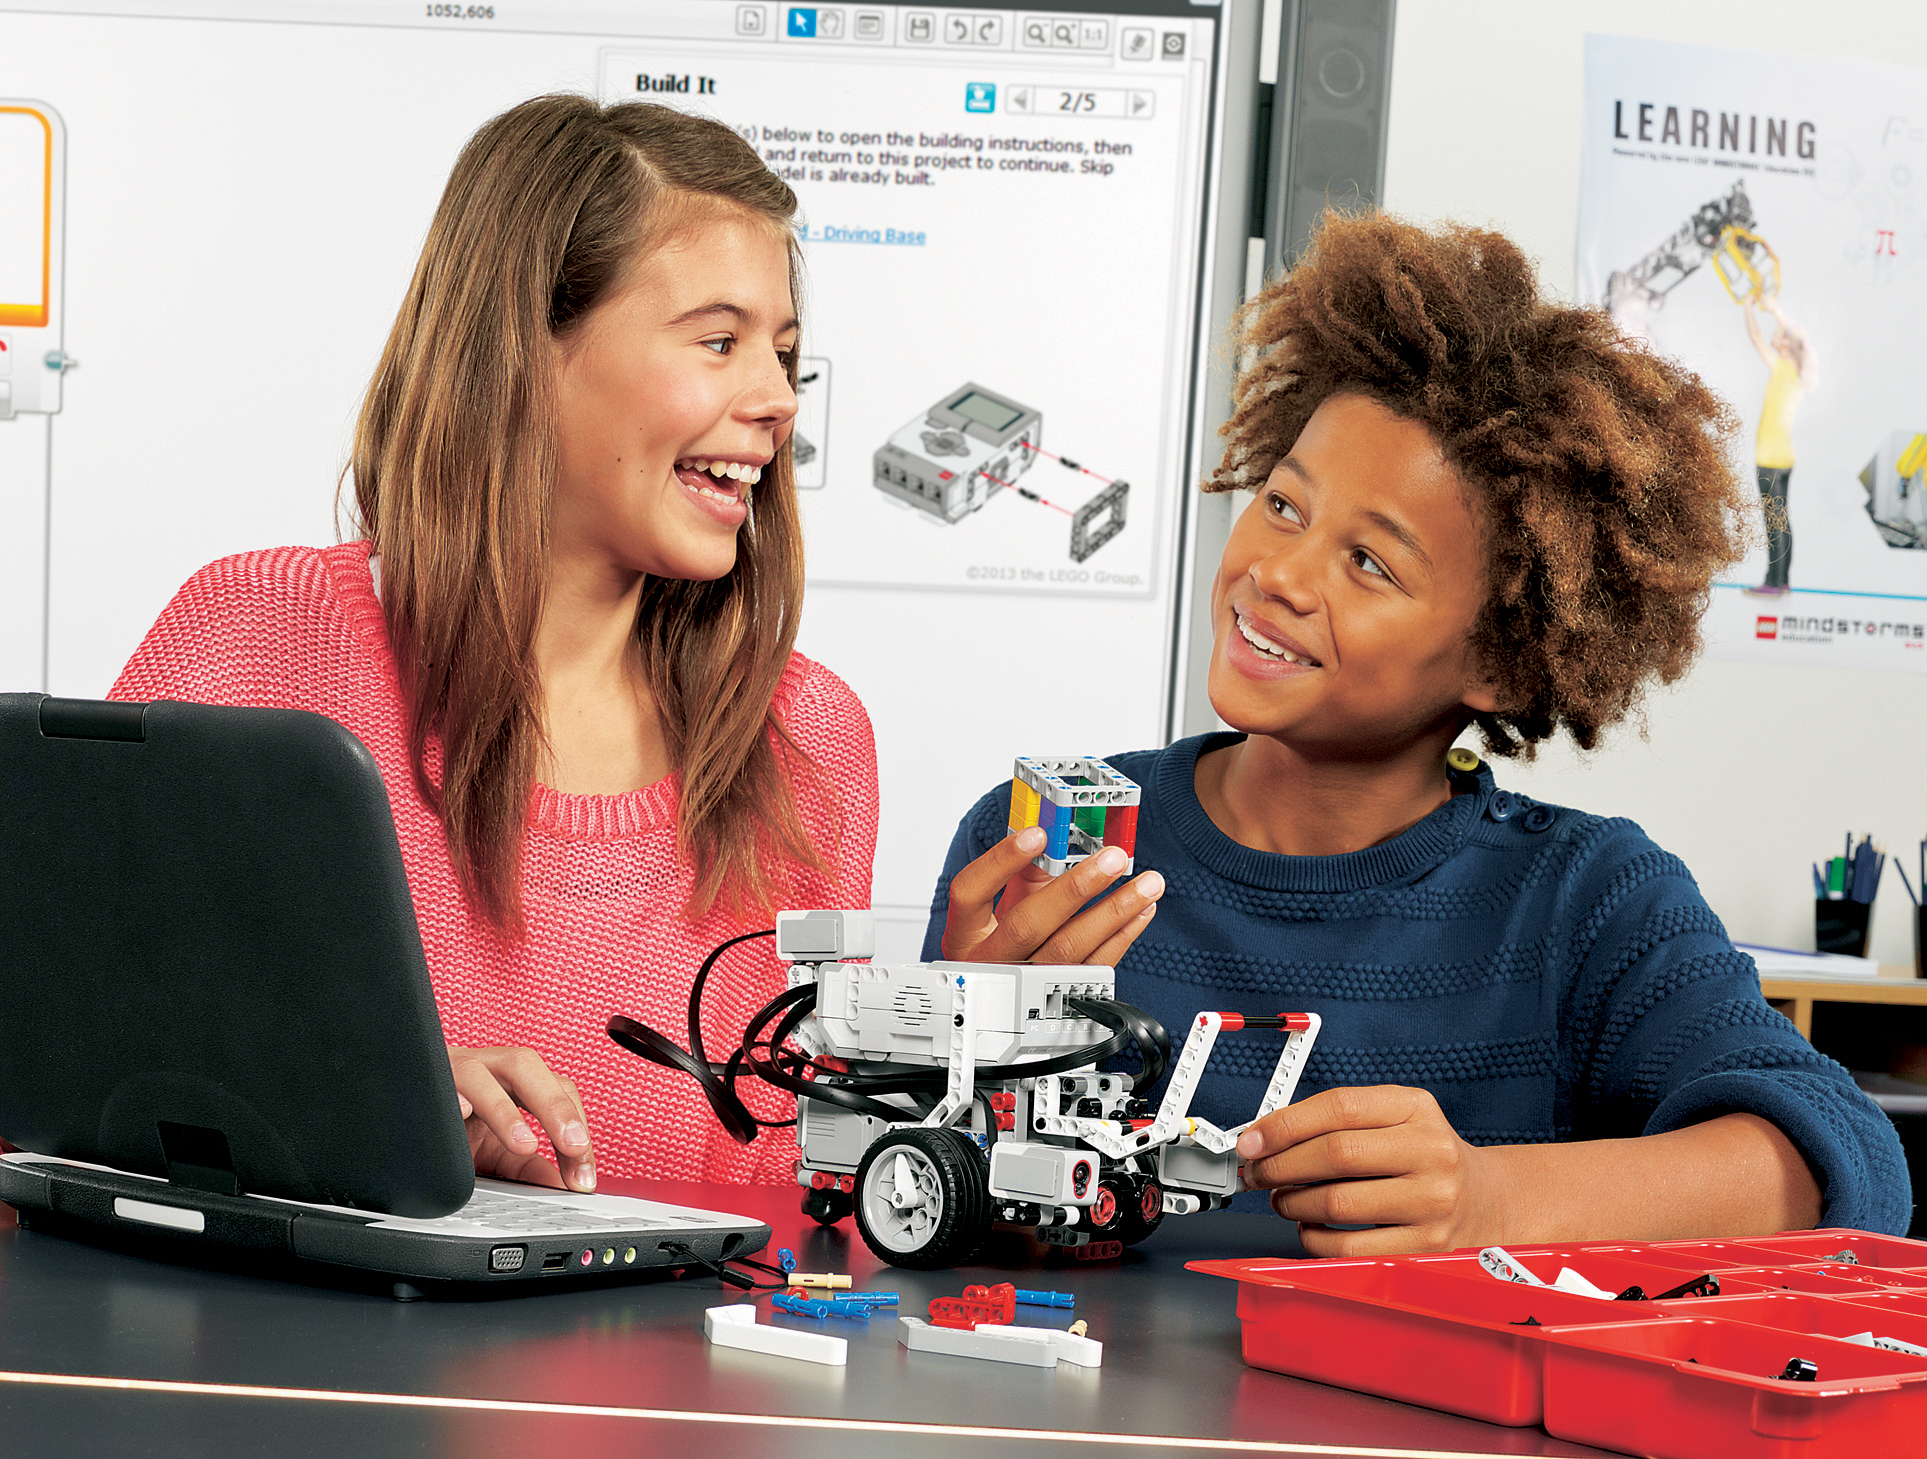 North America Infrared inherit Educational robot packages for schools: Lego, Ozobot, Thymio...